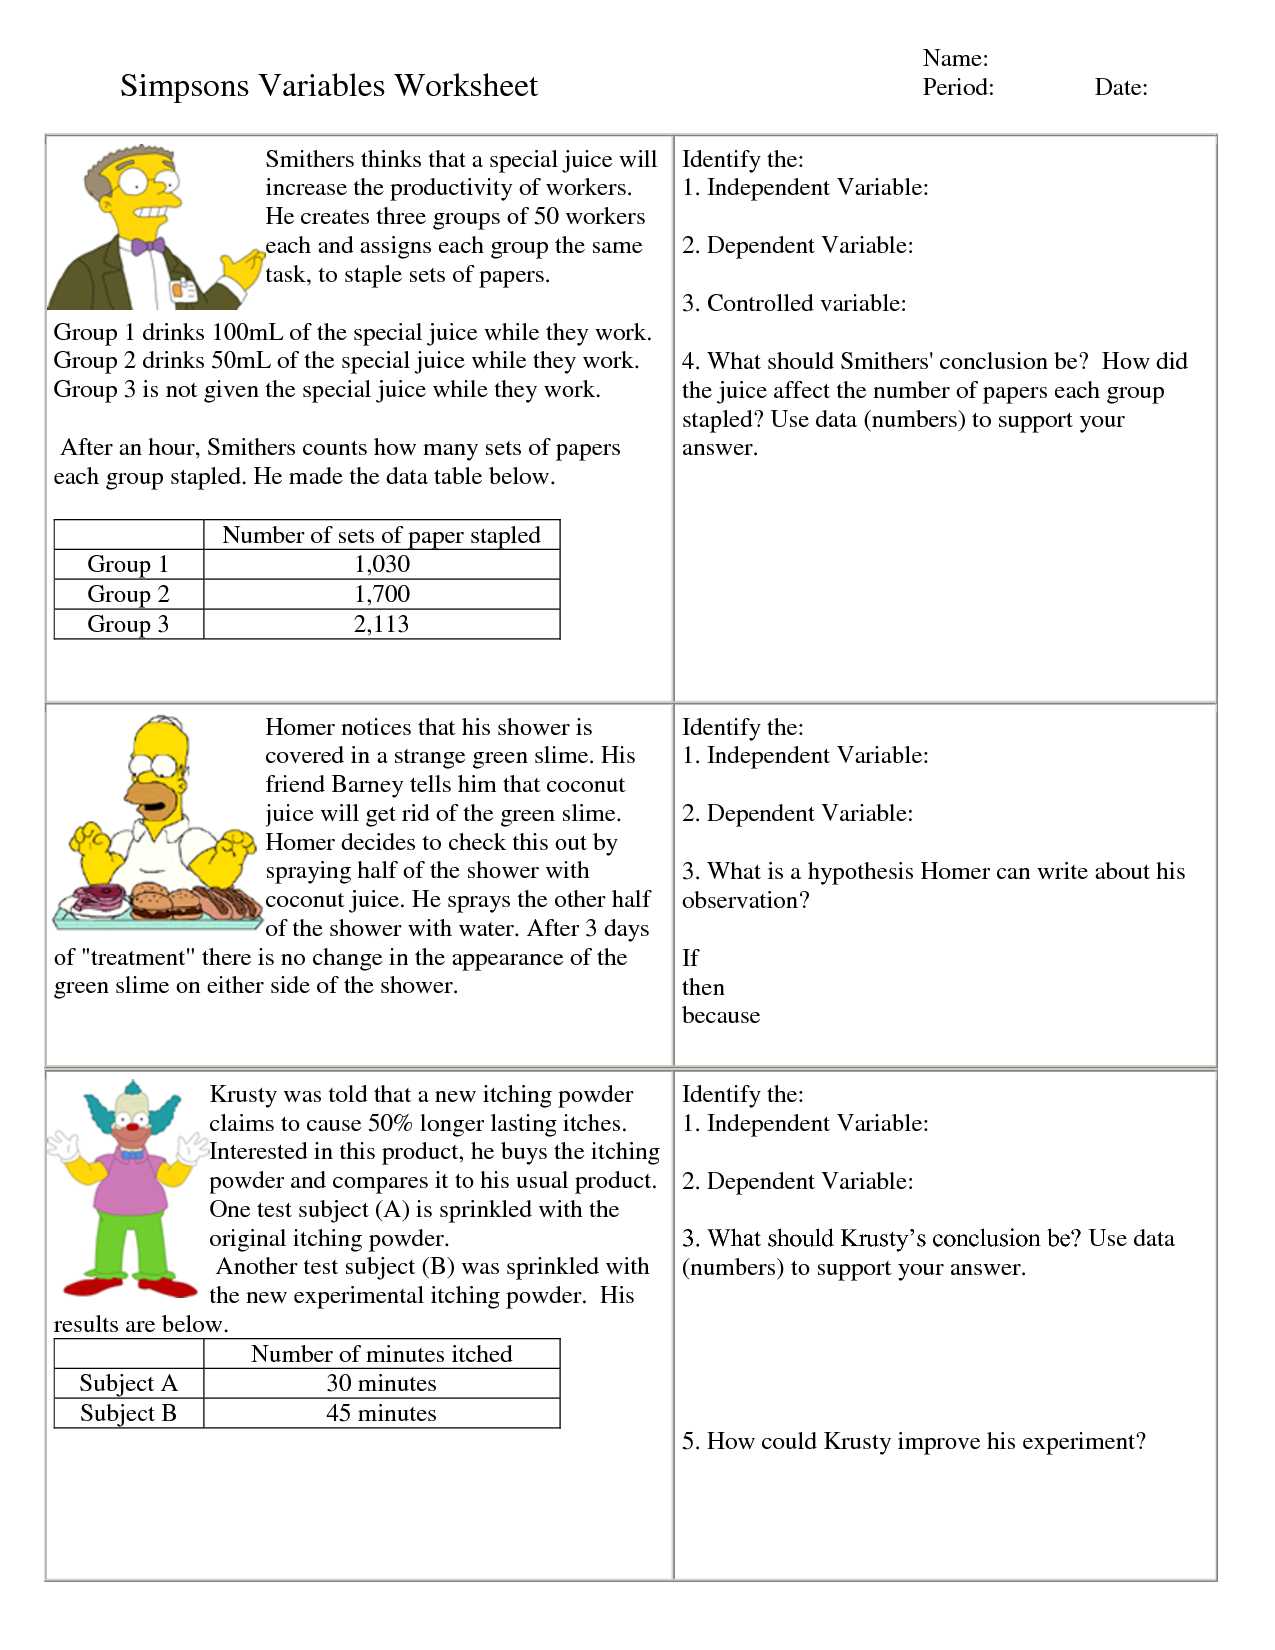 Bill Nye atmosphere Worksheet Answers as Well as Bill Nye the Science Guy Static Electricity Worksheet